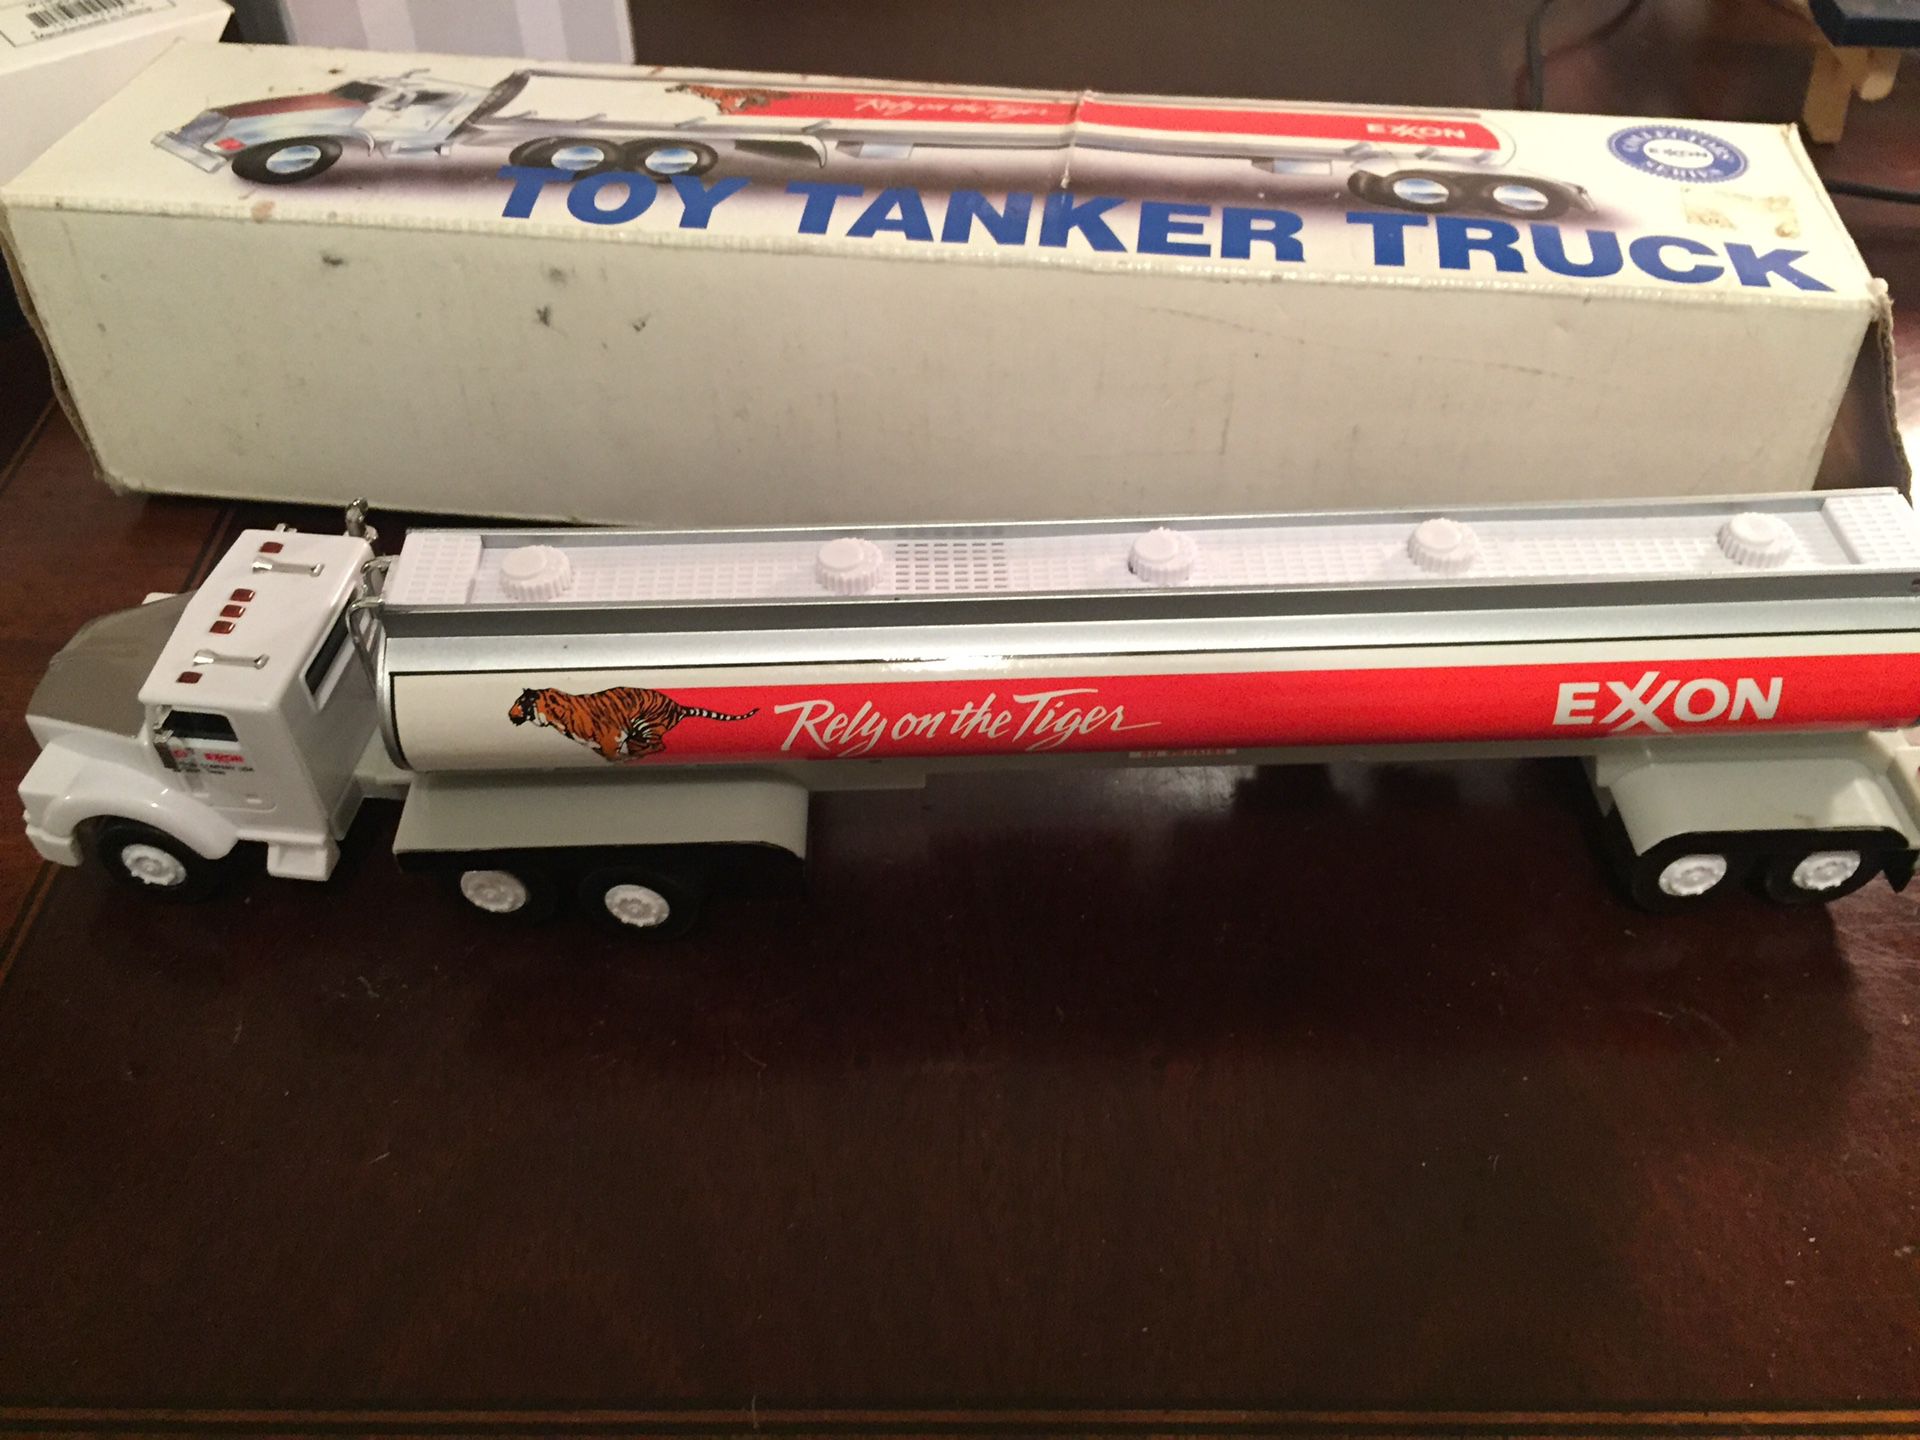 Toy tanker truck collectible